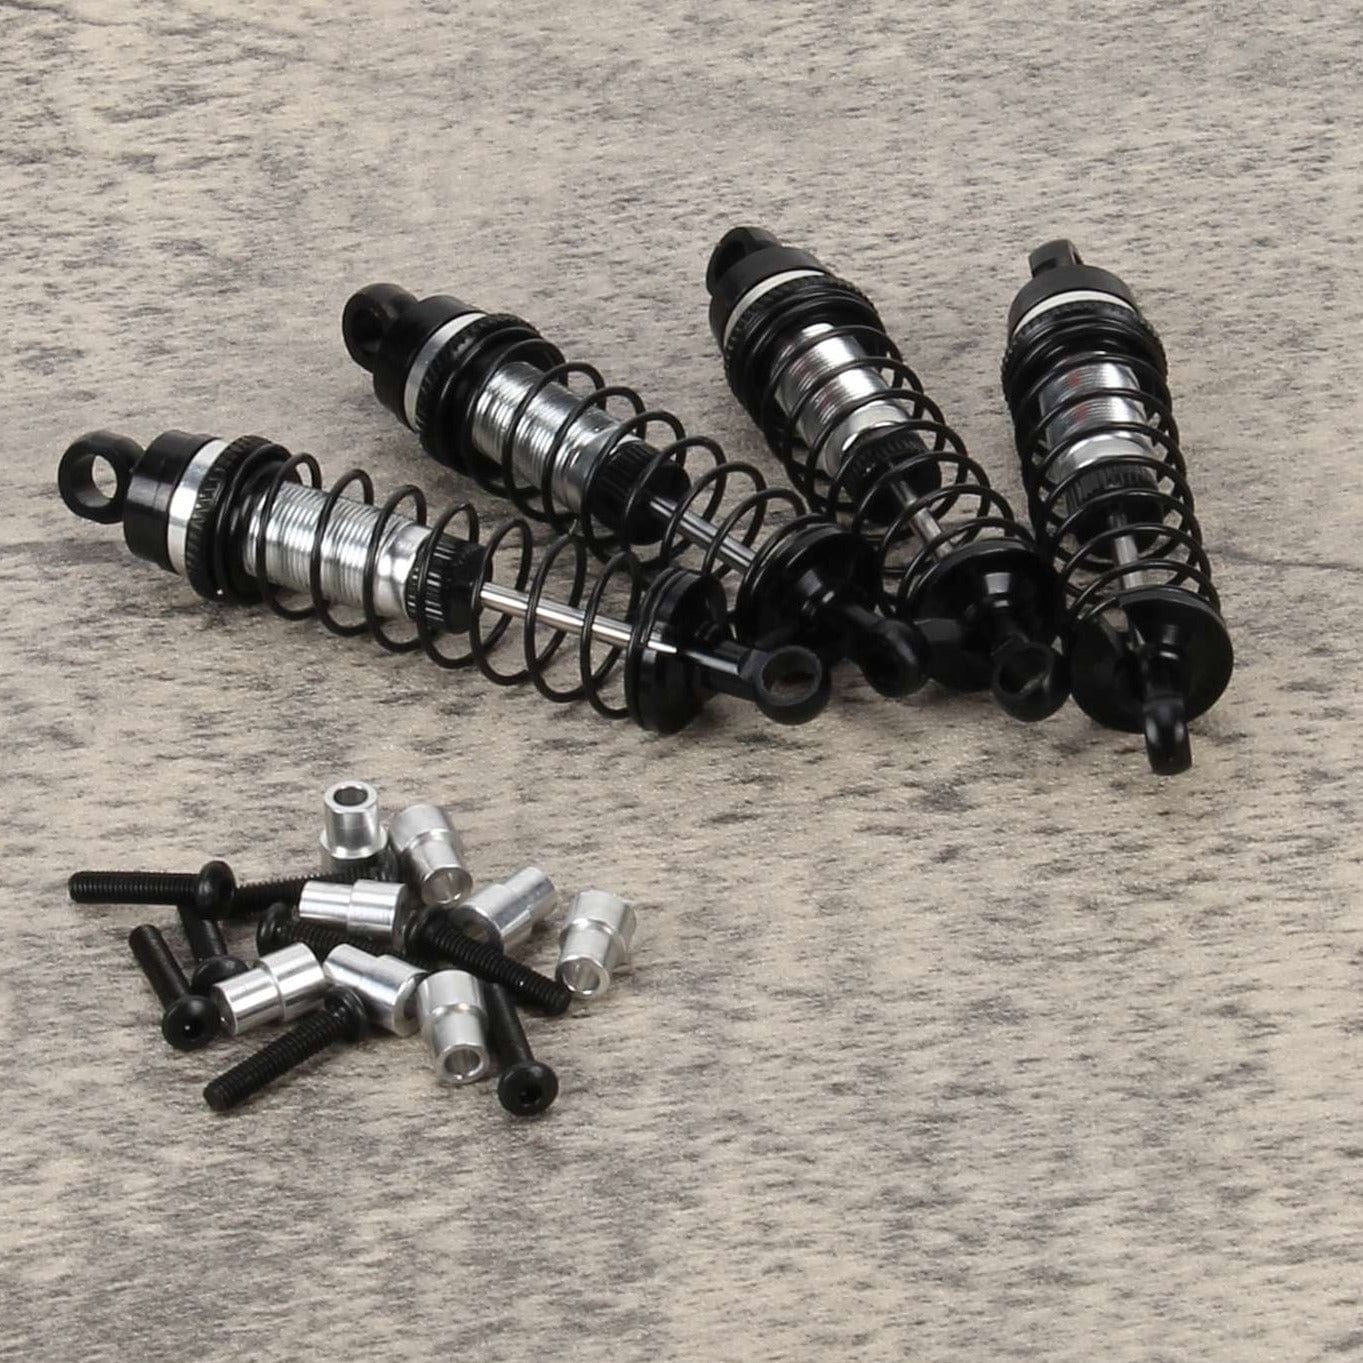 RCAWD Traxxas Latrax Black / 4pcs RCAWD 65mm Oil-filled Shock Absorber for 1/18 Traxxas Latrax Upgrades